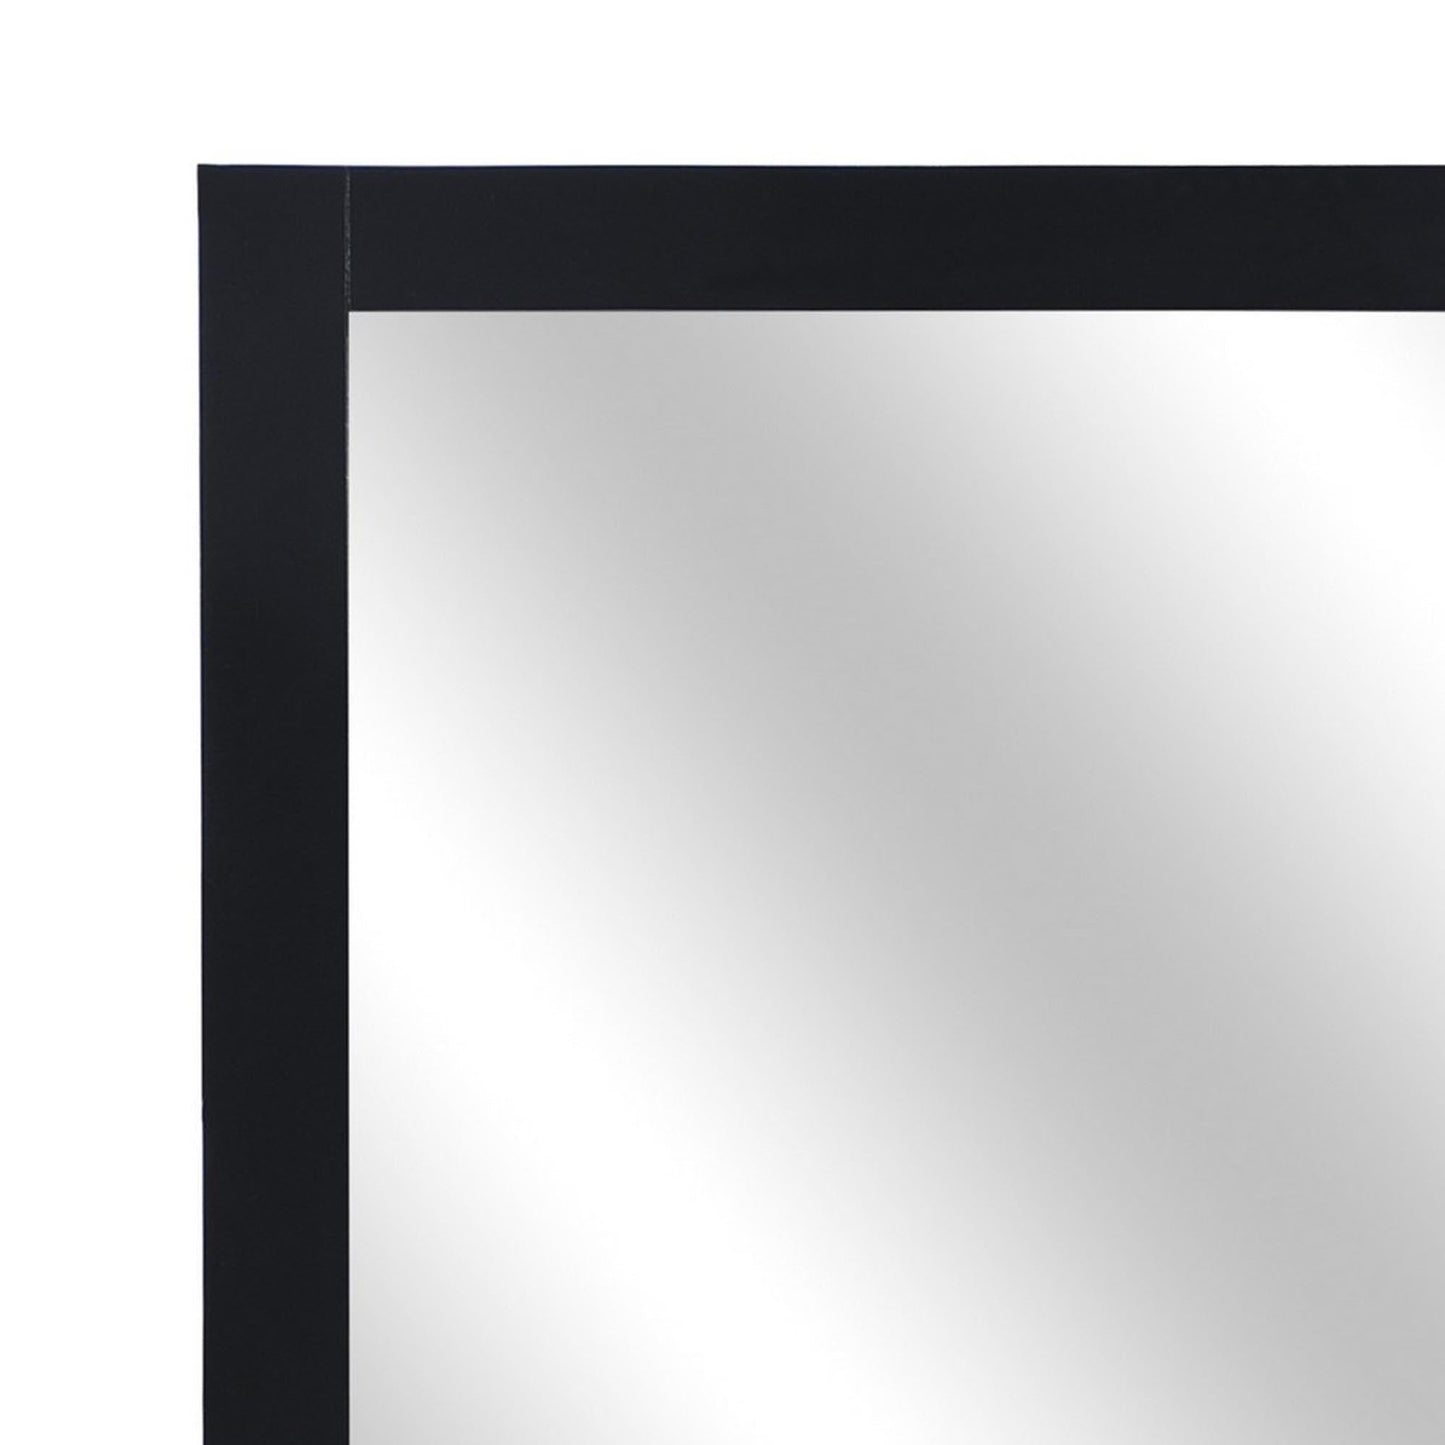 Benzara Black and Silver Square Shape Wooden Frame Mirror With Mounting Hardware